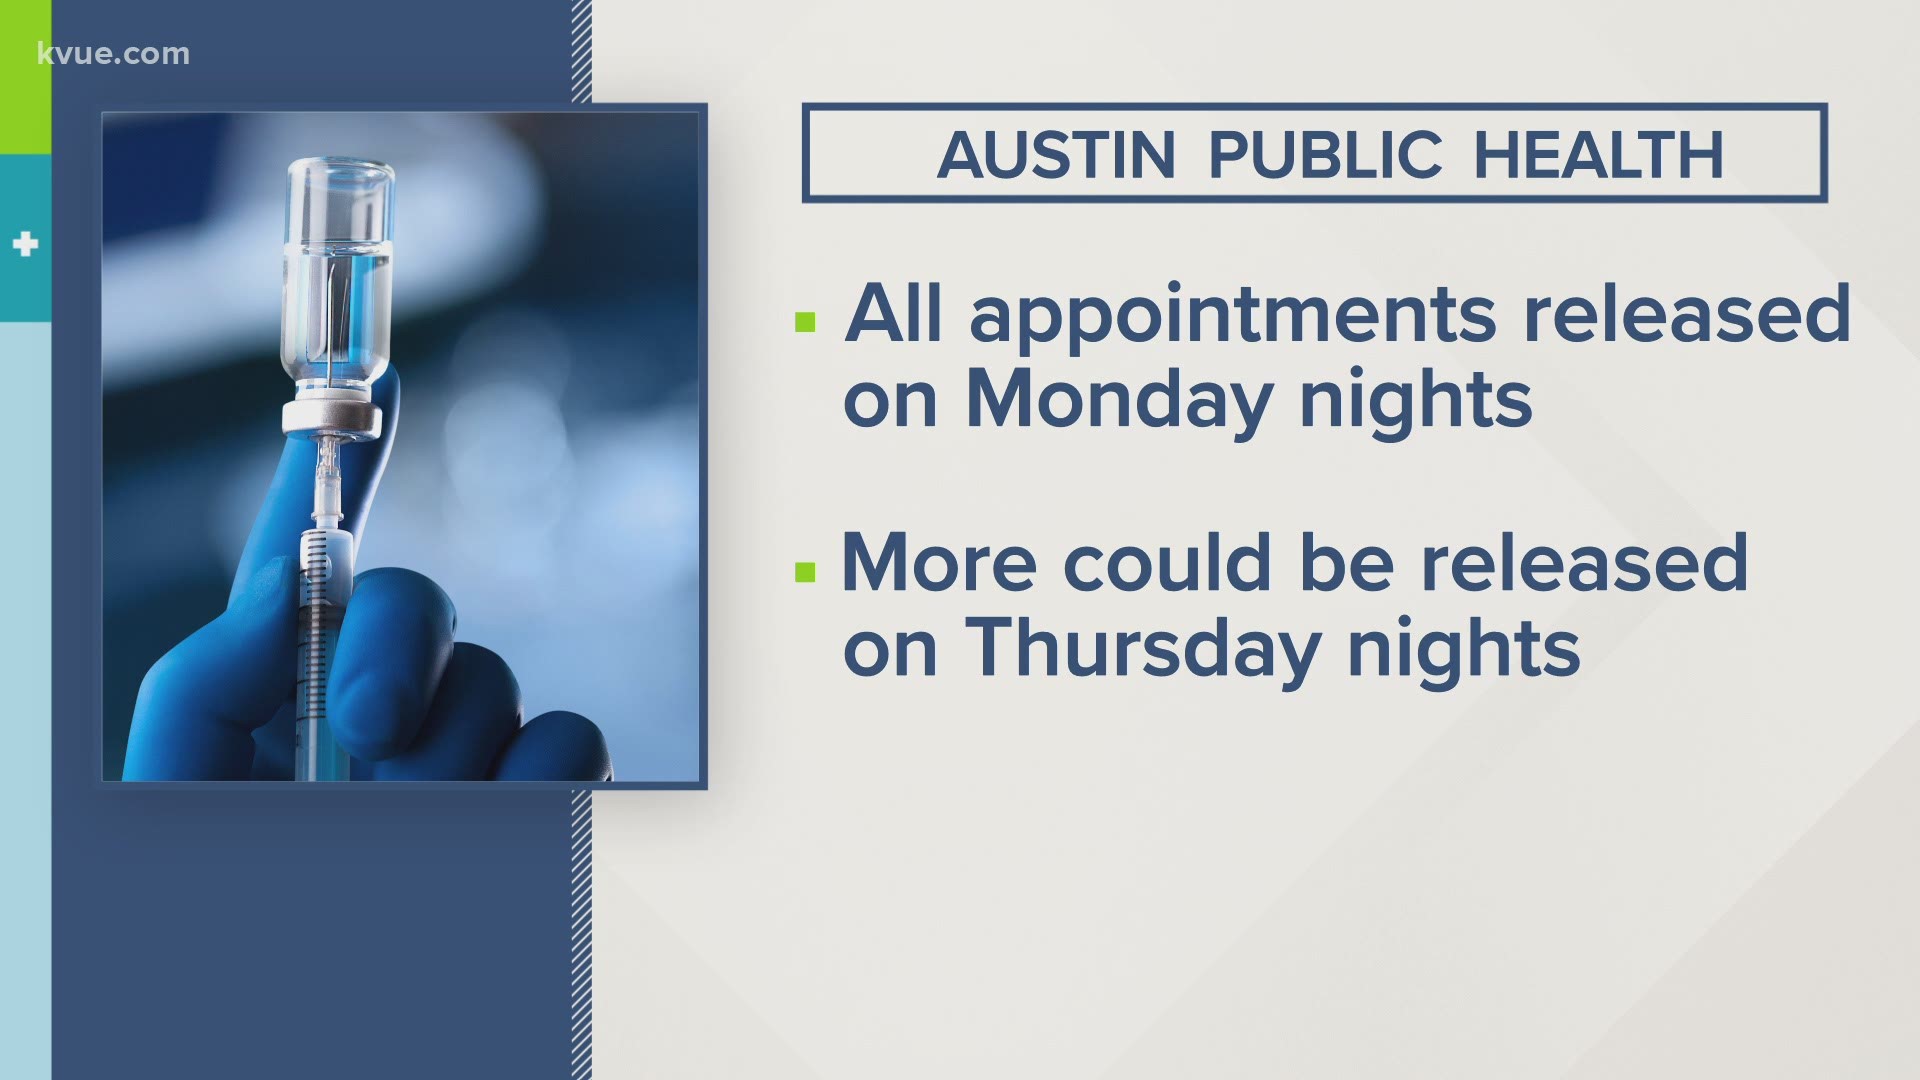 Austin Public Health is changing the way it releases appointments for the first dose of COVID-19 vaccine.